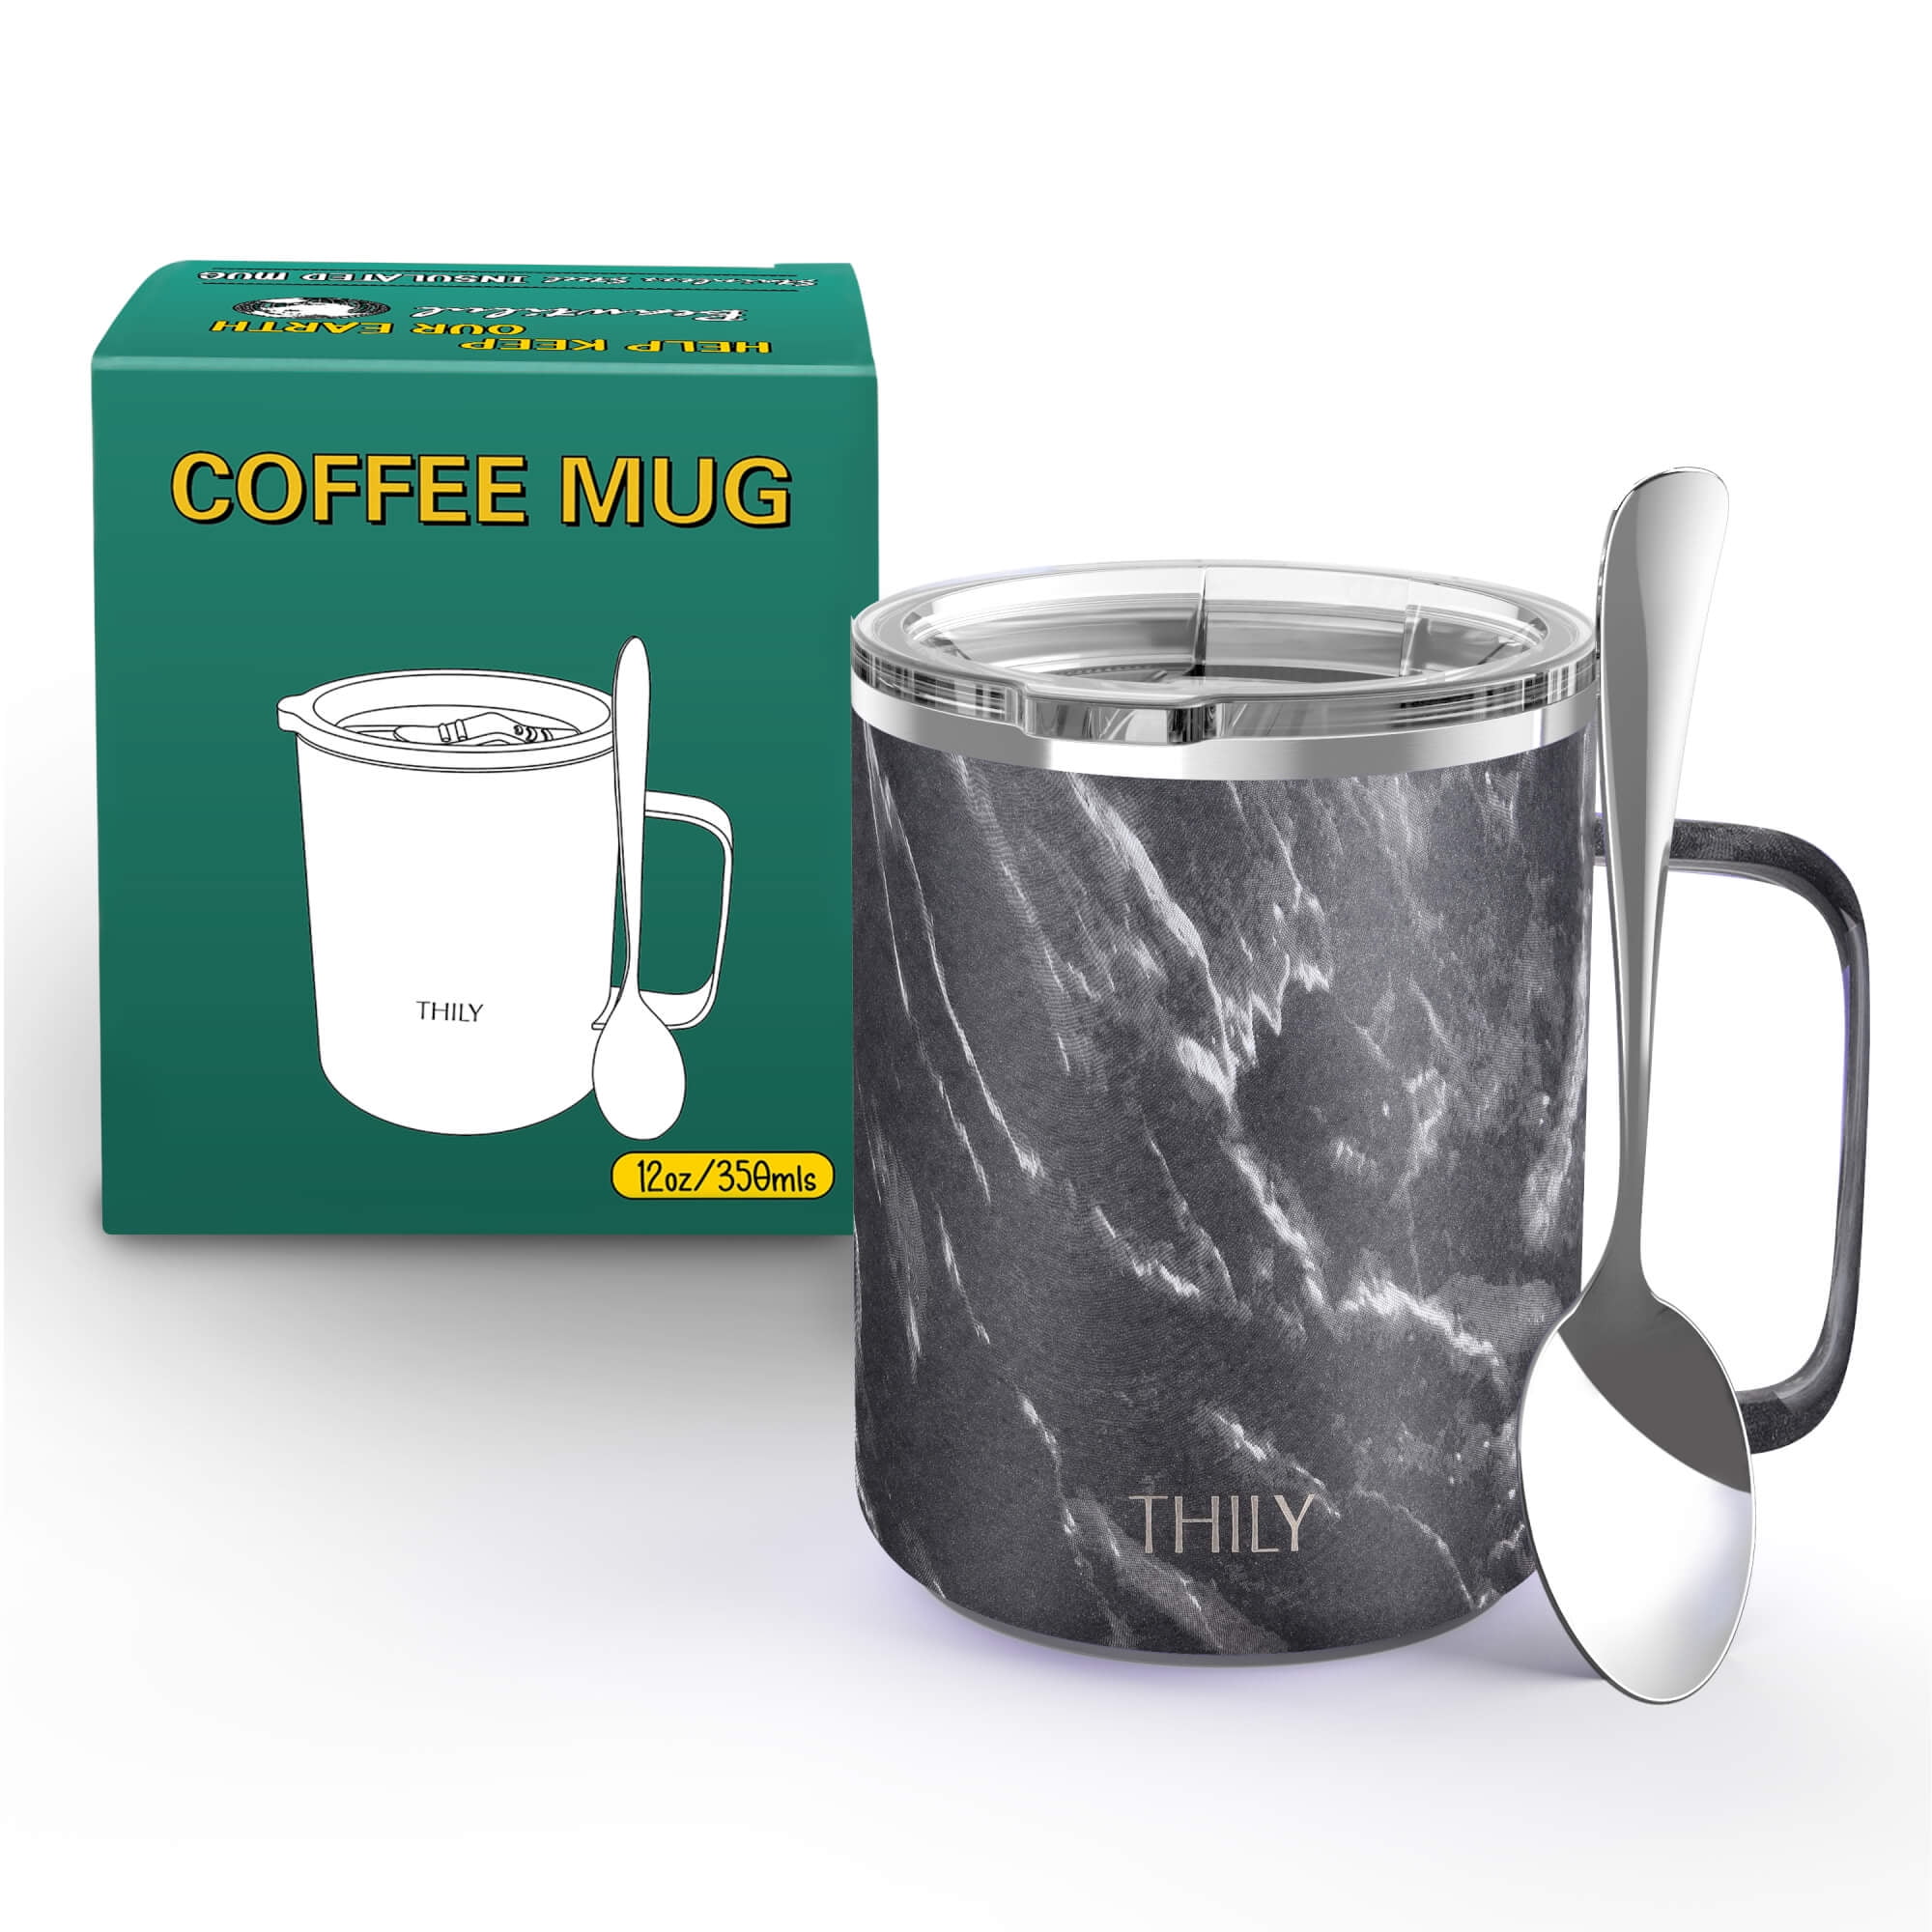 Tropical Smoothie Cafe - Want to use a reusable mug at our store? Buy a  Whirley mug for $2.99 and bring it back each time to refill it with your  smoothie and